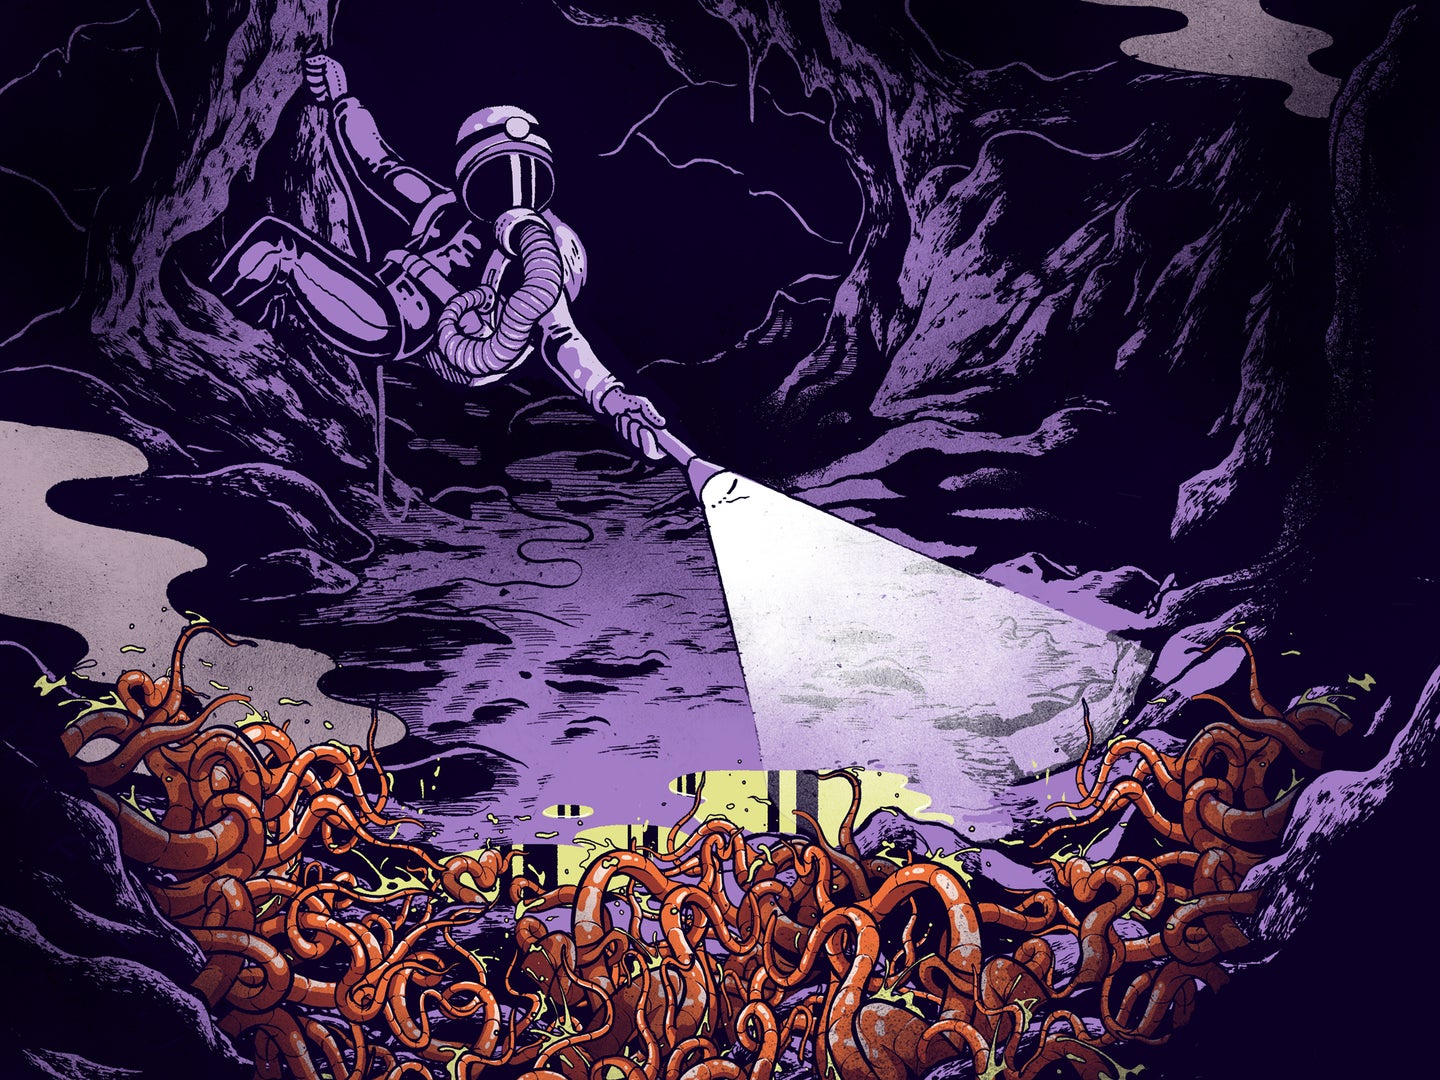 An illustration of worms in caves in an article about their benefits to humanity.